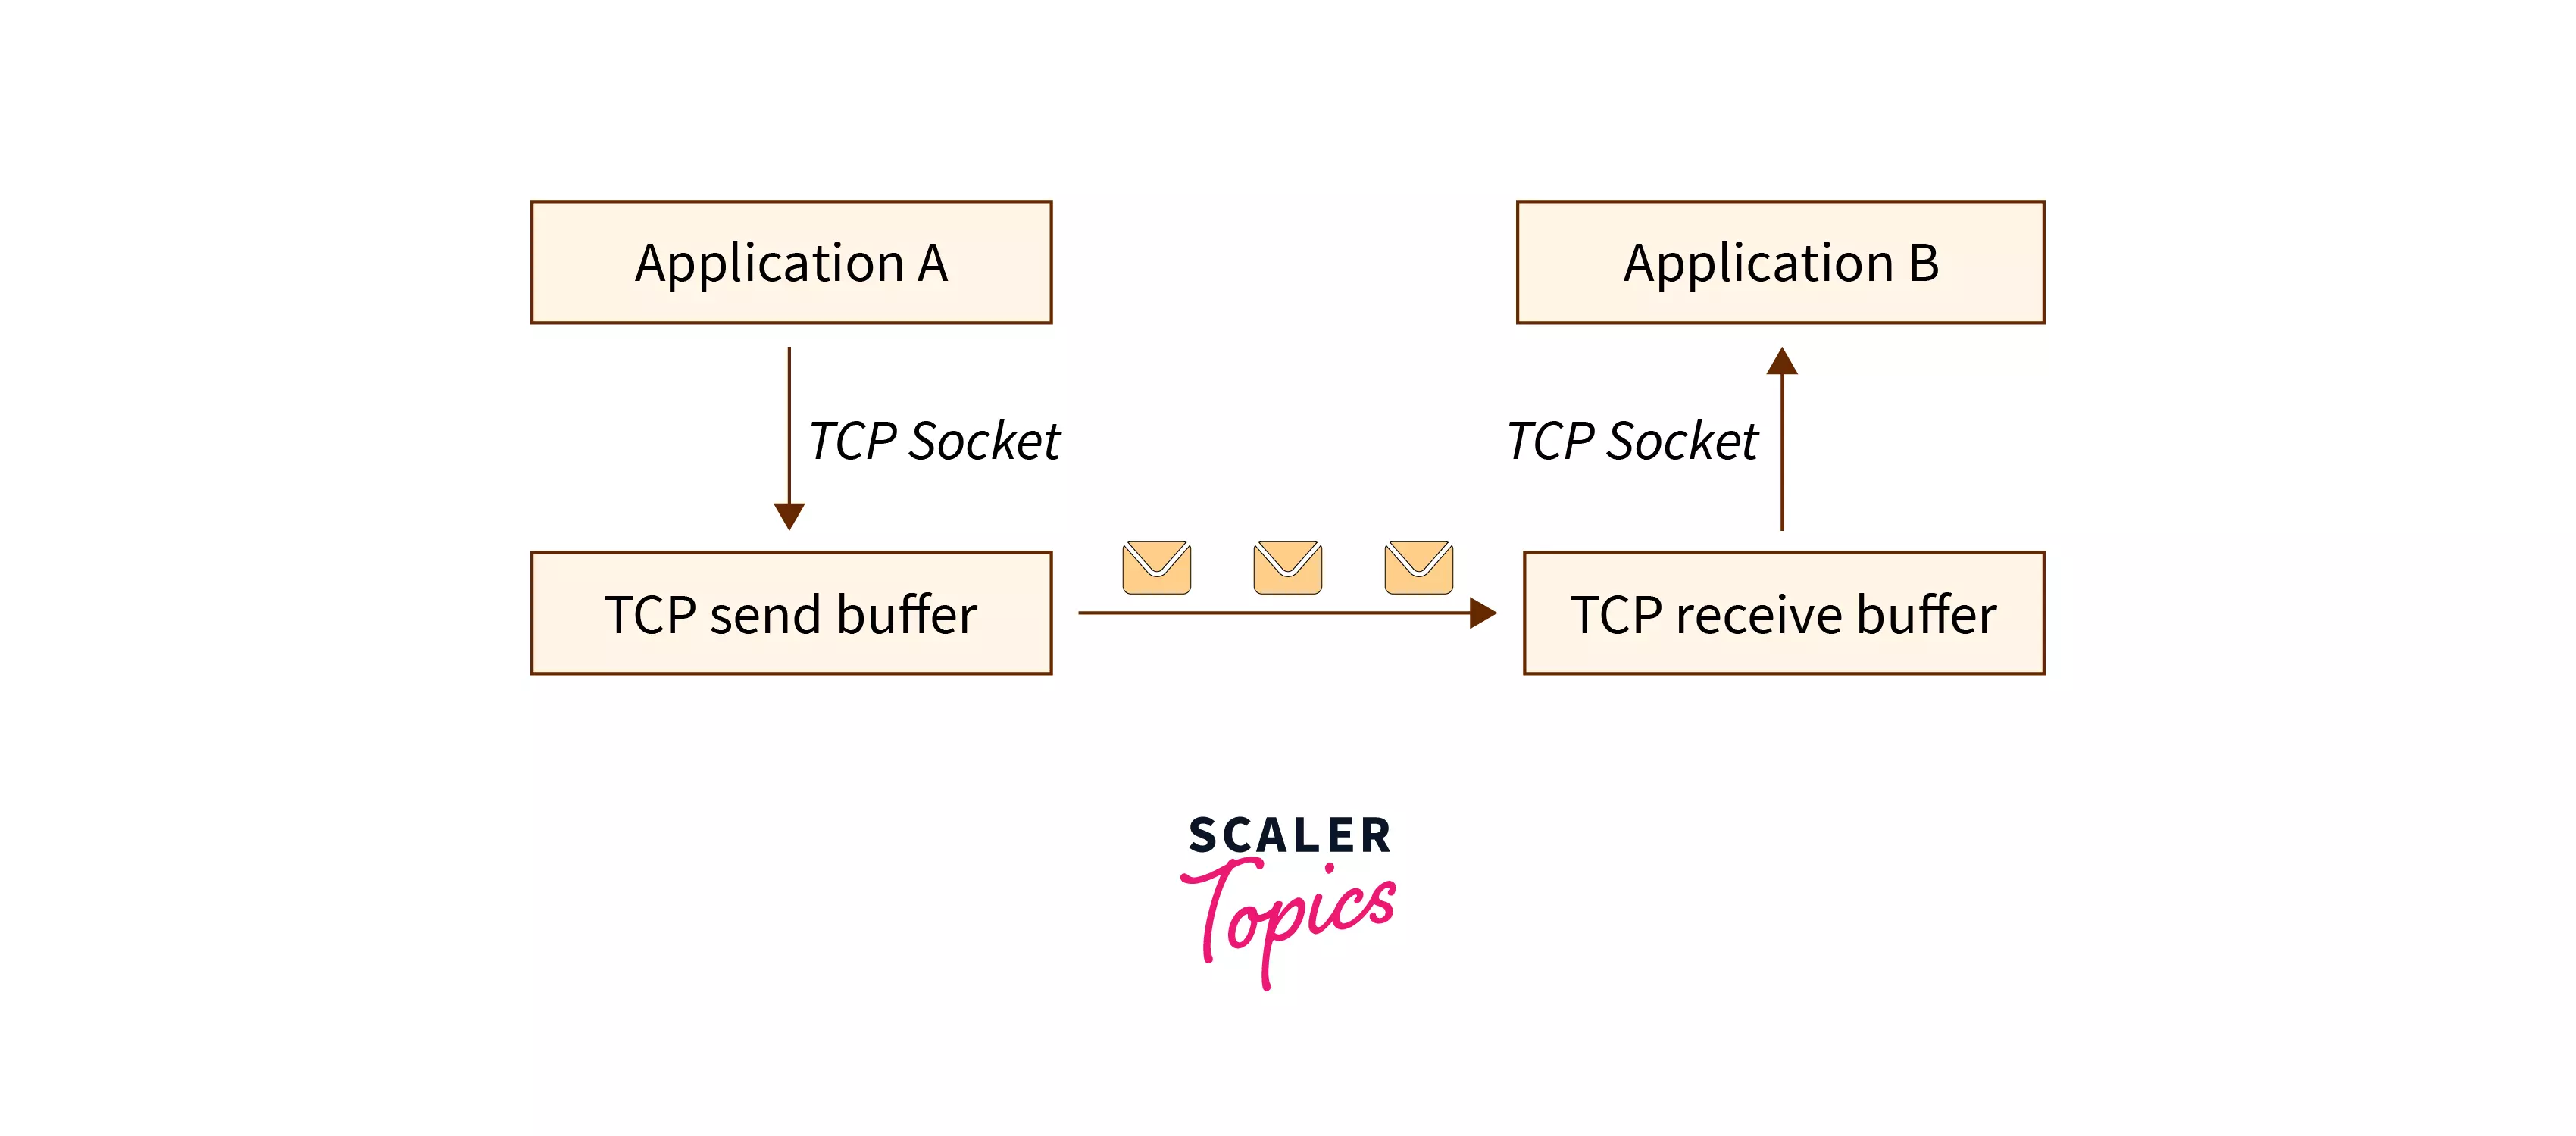 How does Flow Control Work in TCP